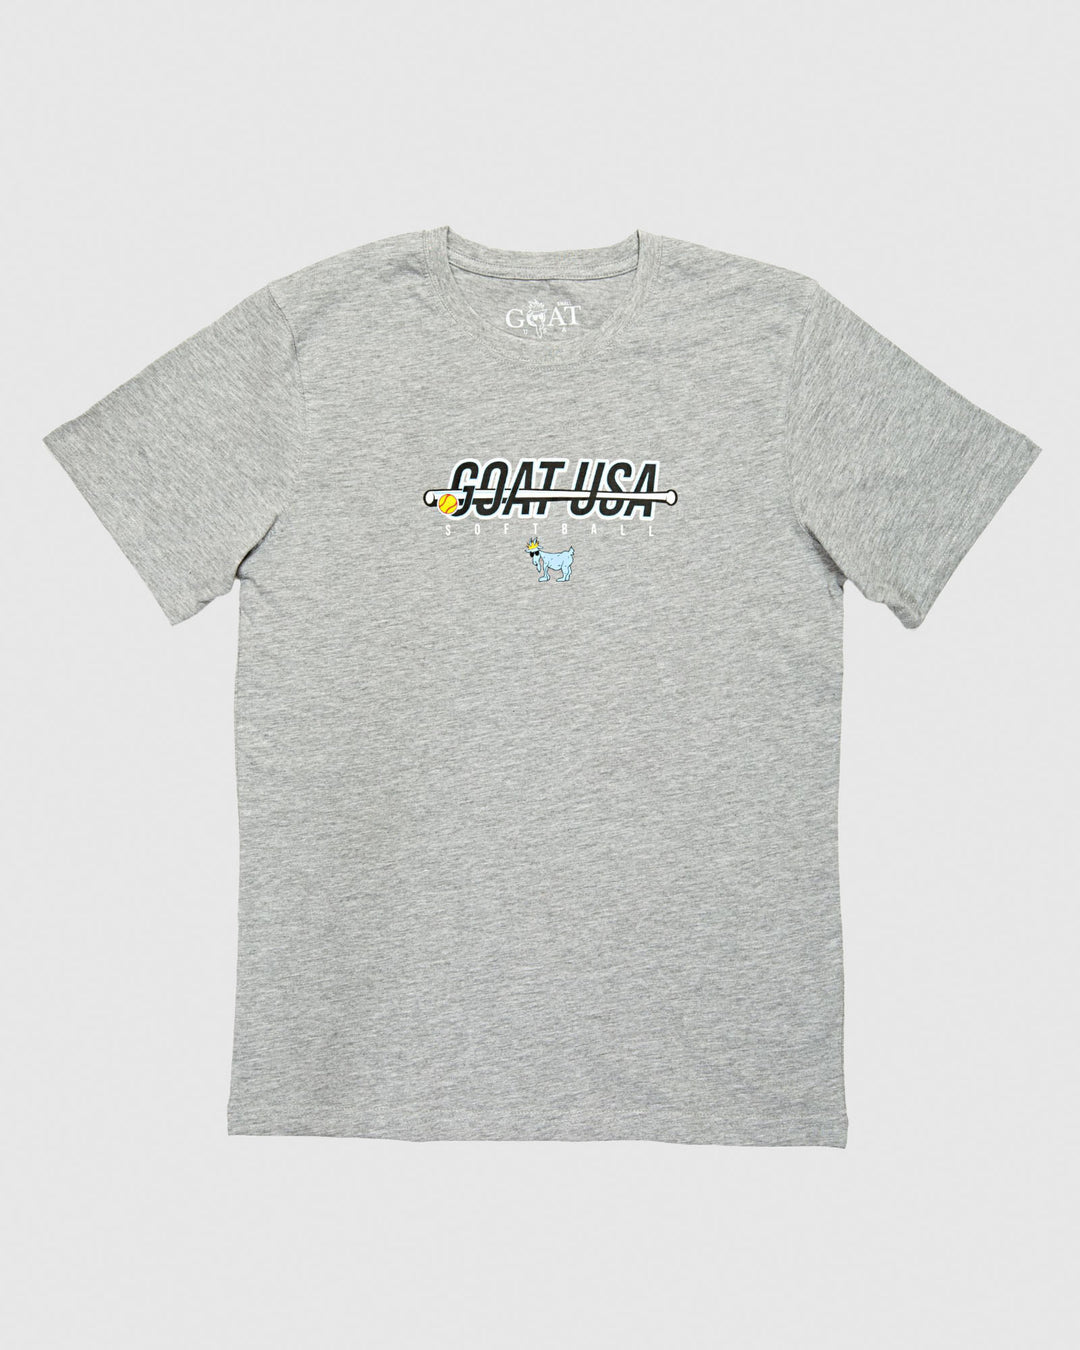 Gray shirt with softball bat that goes through the wording "GOAT USA"